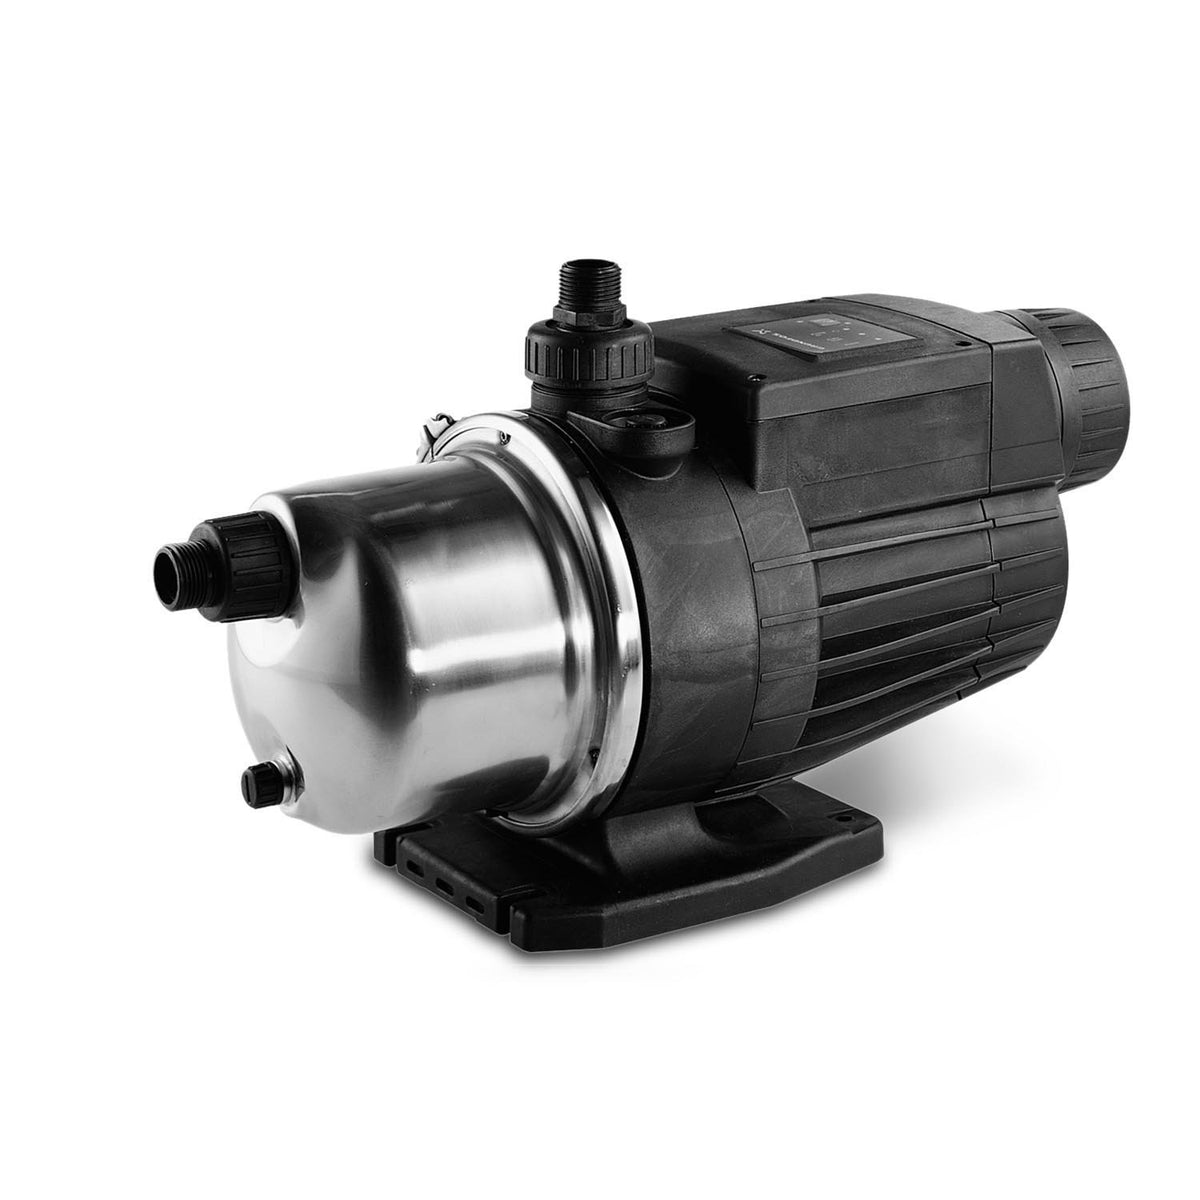 Grundfos MQ3-45 (115V) 1 HP Pressure Booster Pump - Parts - Crystal Quest Water Filters